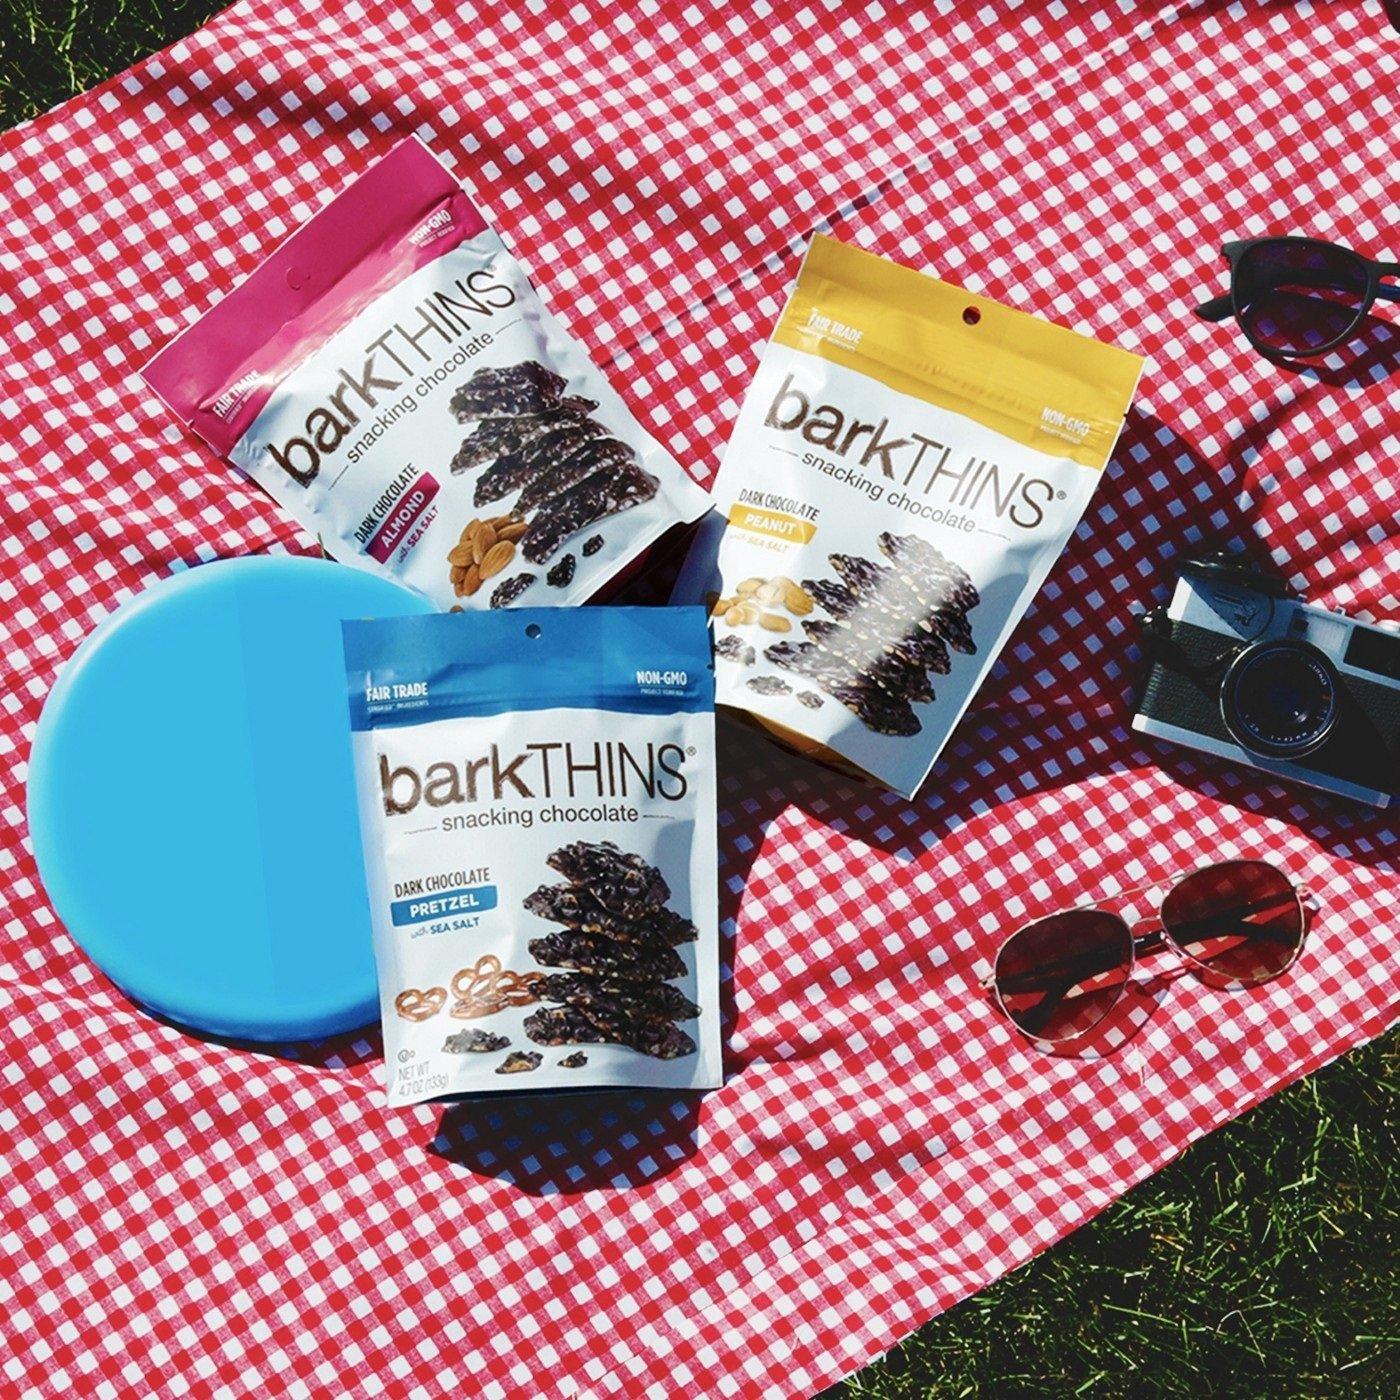 Chocolate Review: barkTHINS Dark Chocolate Coconut with Almonds